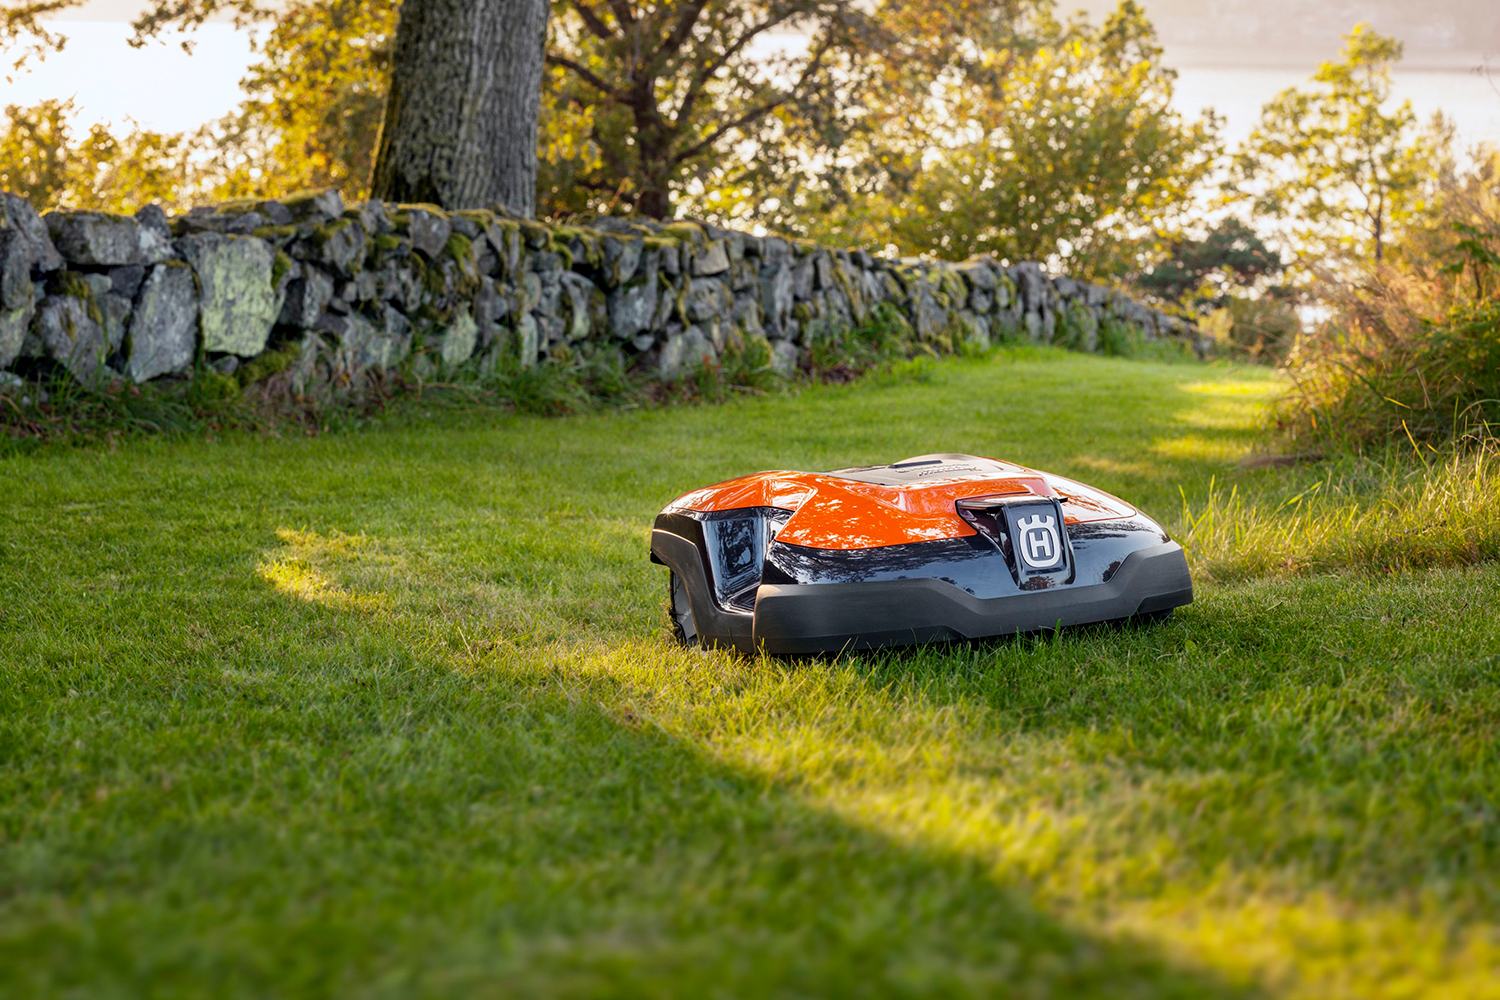 https://www.digitaltrends.com/wp-content/uploads/2018/04/robot-lawnmowers-are-making-their-way-onto-american-grass.jpg?fit=1500%2C1000&p=1